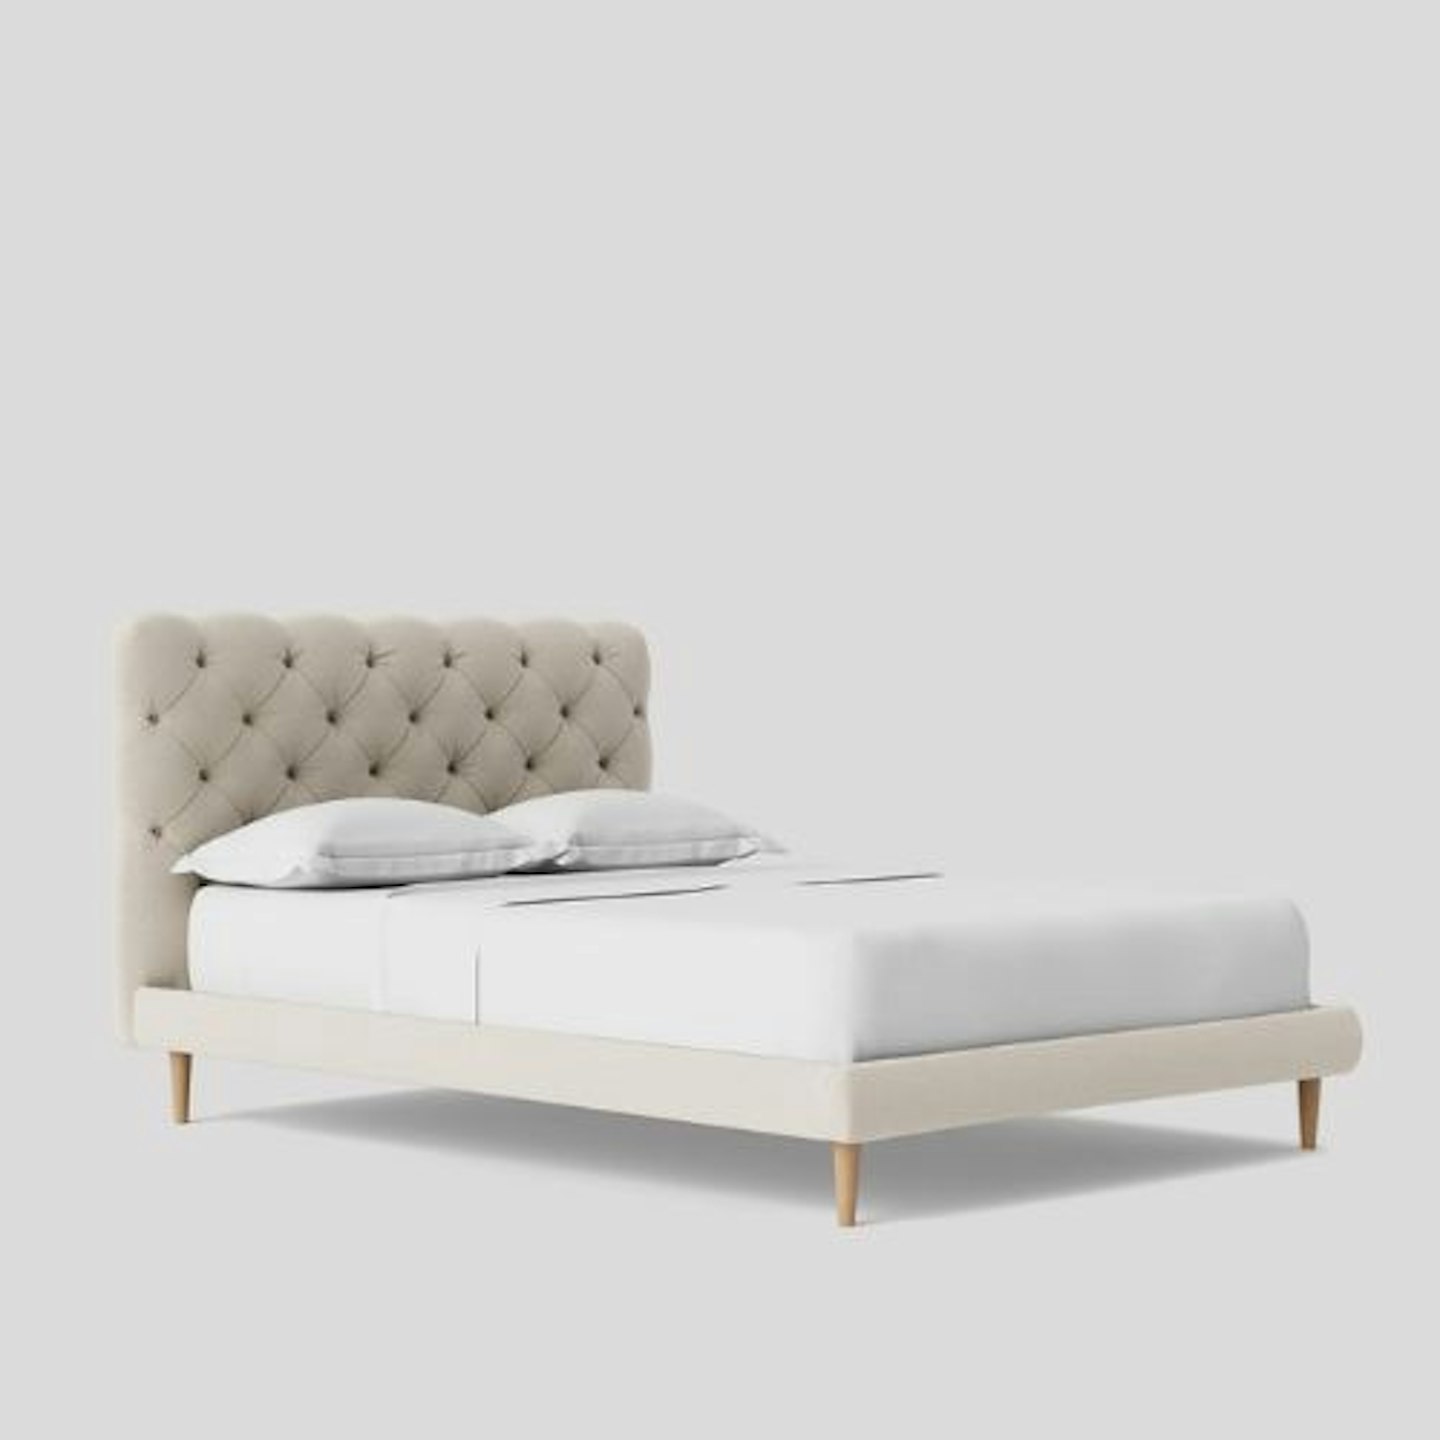 Burbage Double Size Bed Frame